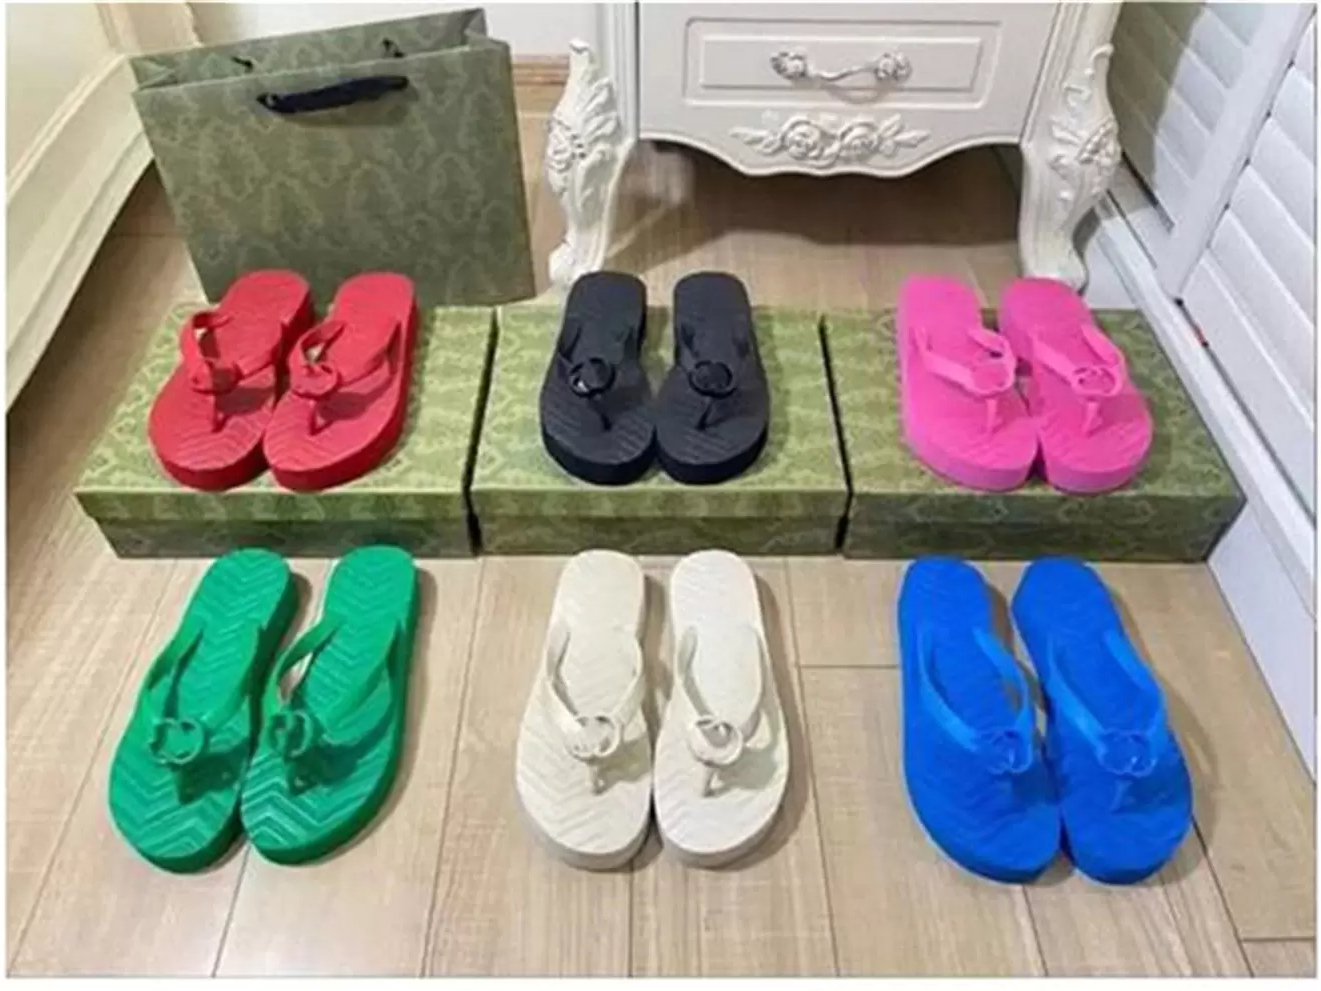 

2023 fashion Slippers designer ladies flip flops simple youth slippers moccasin shoes suitable for spring summer and autumn hotels beaches other places size 35-42, Red